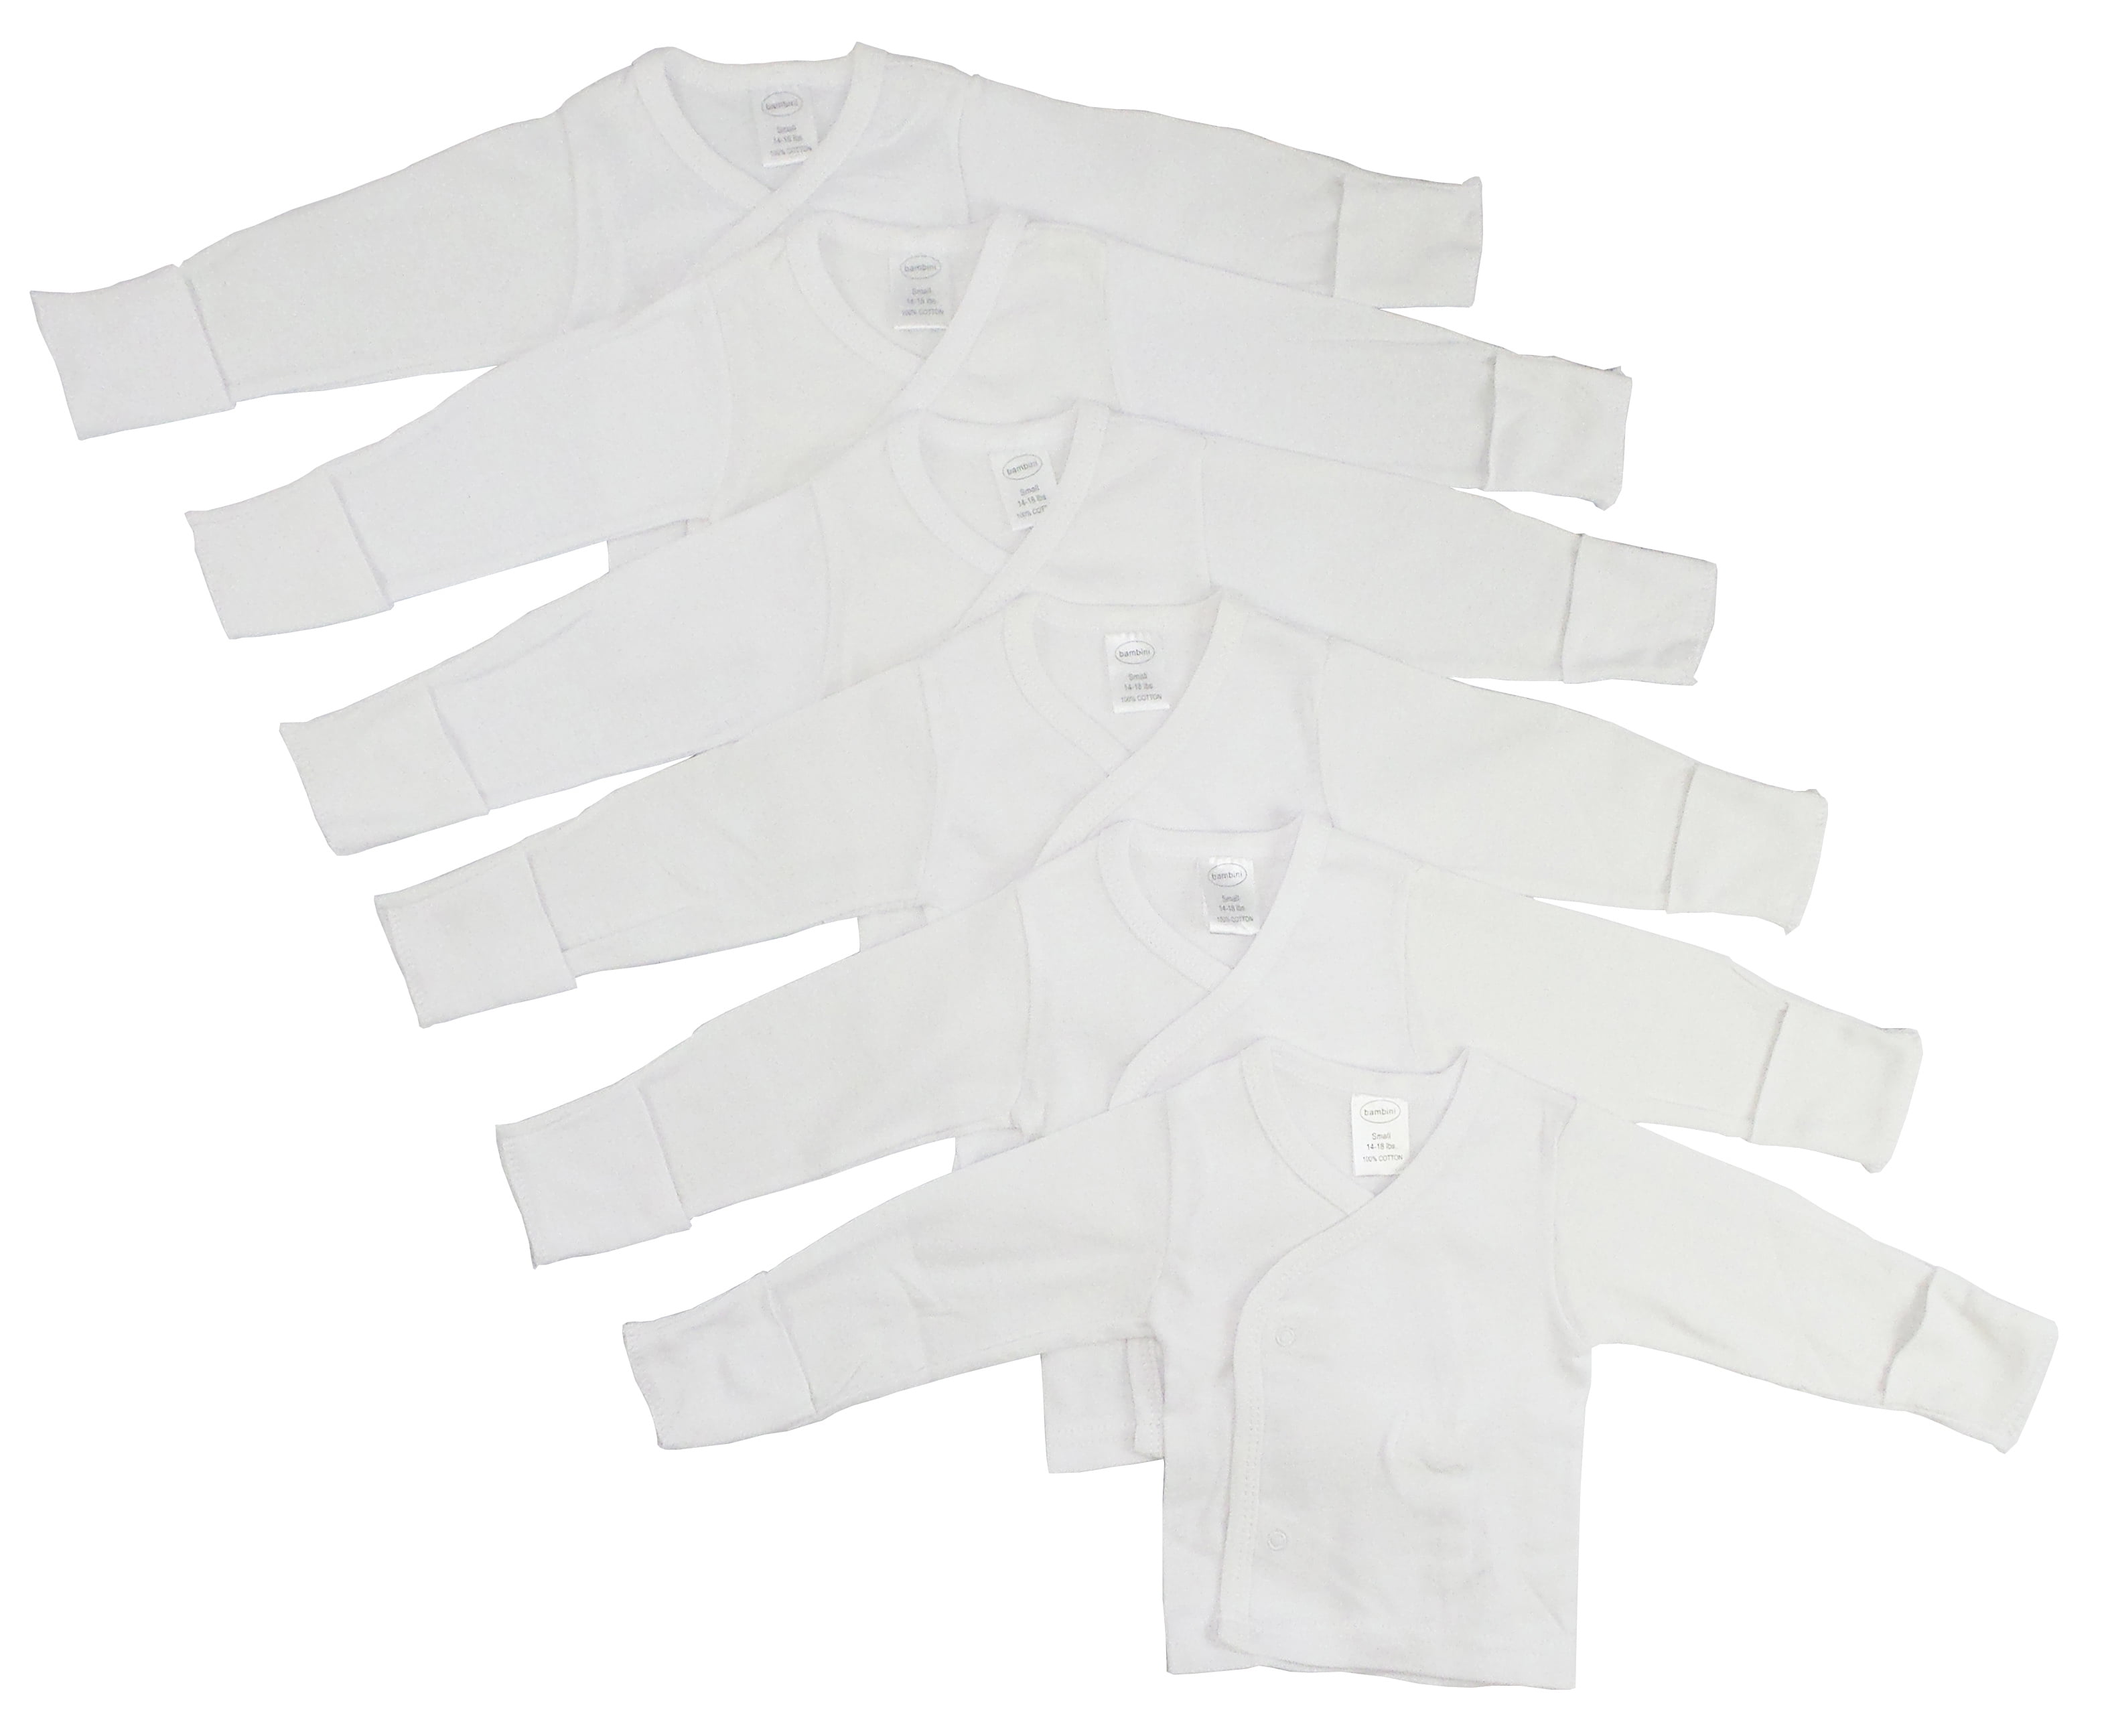 Cs-071s-071s Long Sleeve Side Snap With Mitten, White - Small